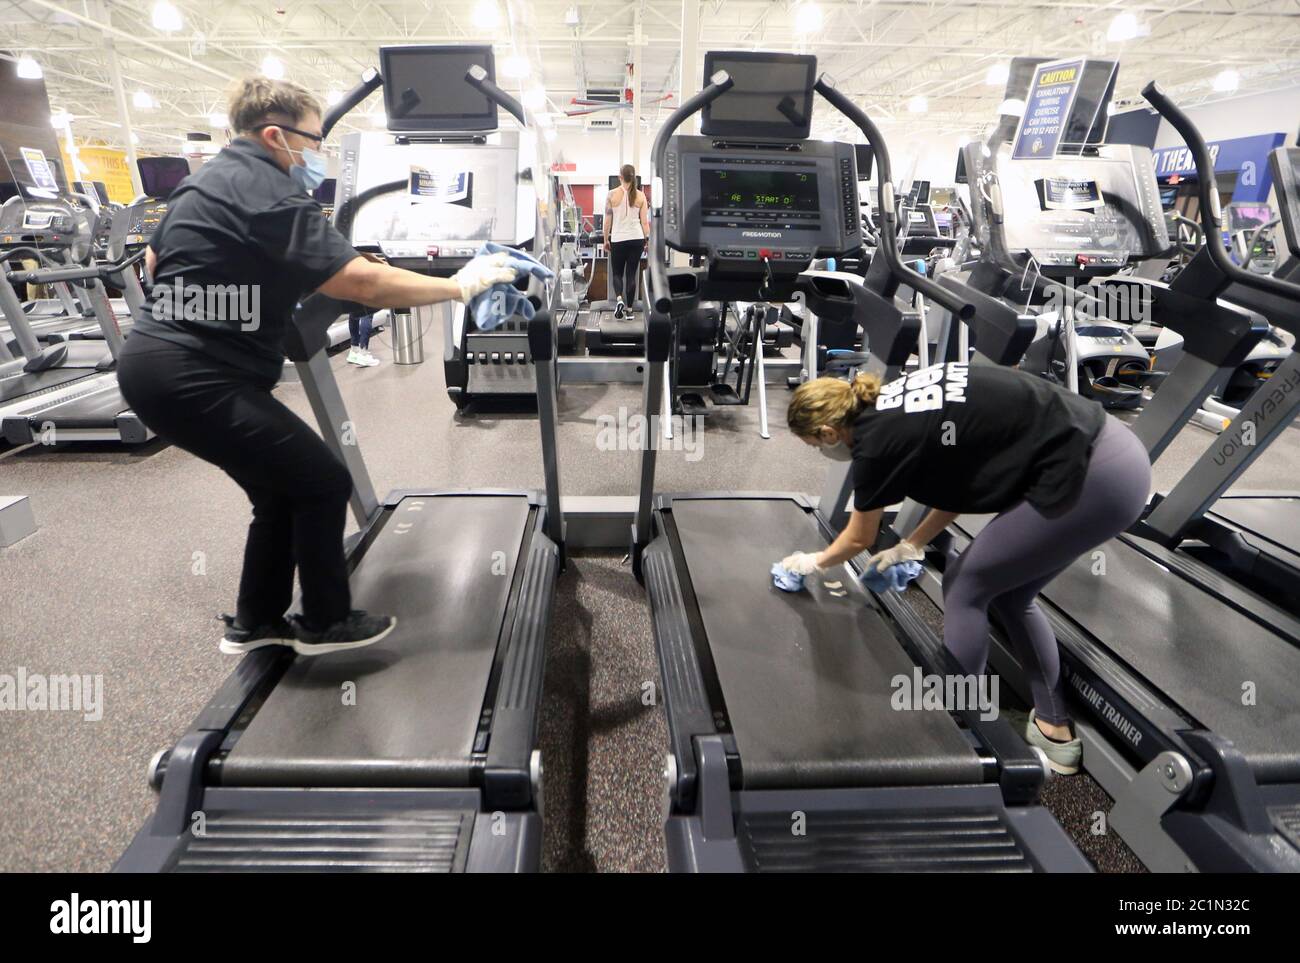 Maplewood United States 15th June Club Fitness Gym Employees Clean Equipment After Use On Day One Of Their Reopening In Maplewood Missouri On Monday June 15 All St Louis County